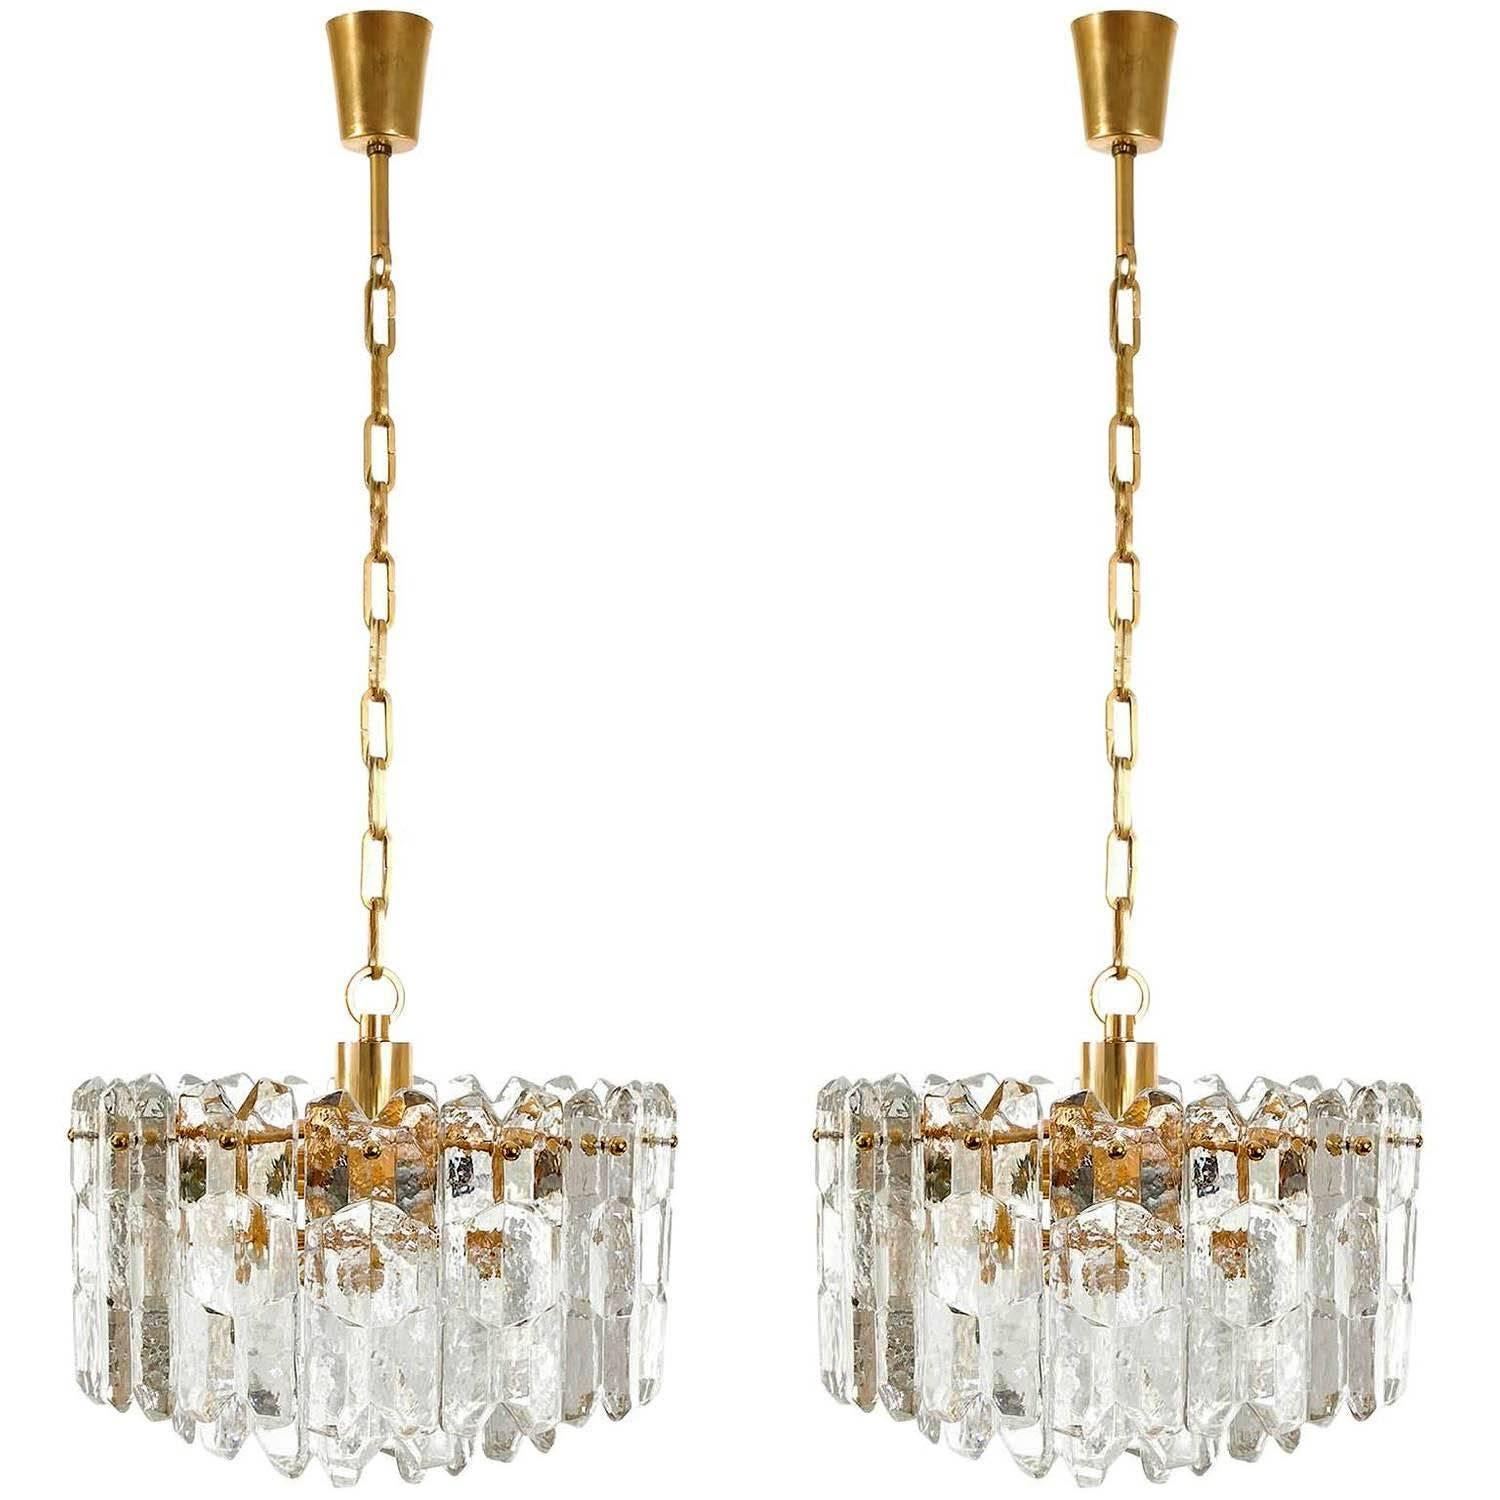 Late 20th Century Mid-Century Gilt Brass and Glass Chandelier Pendant Light by Kalmar 1970, 1 of 3